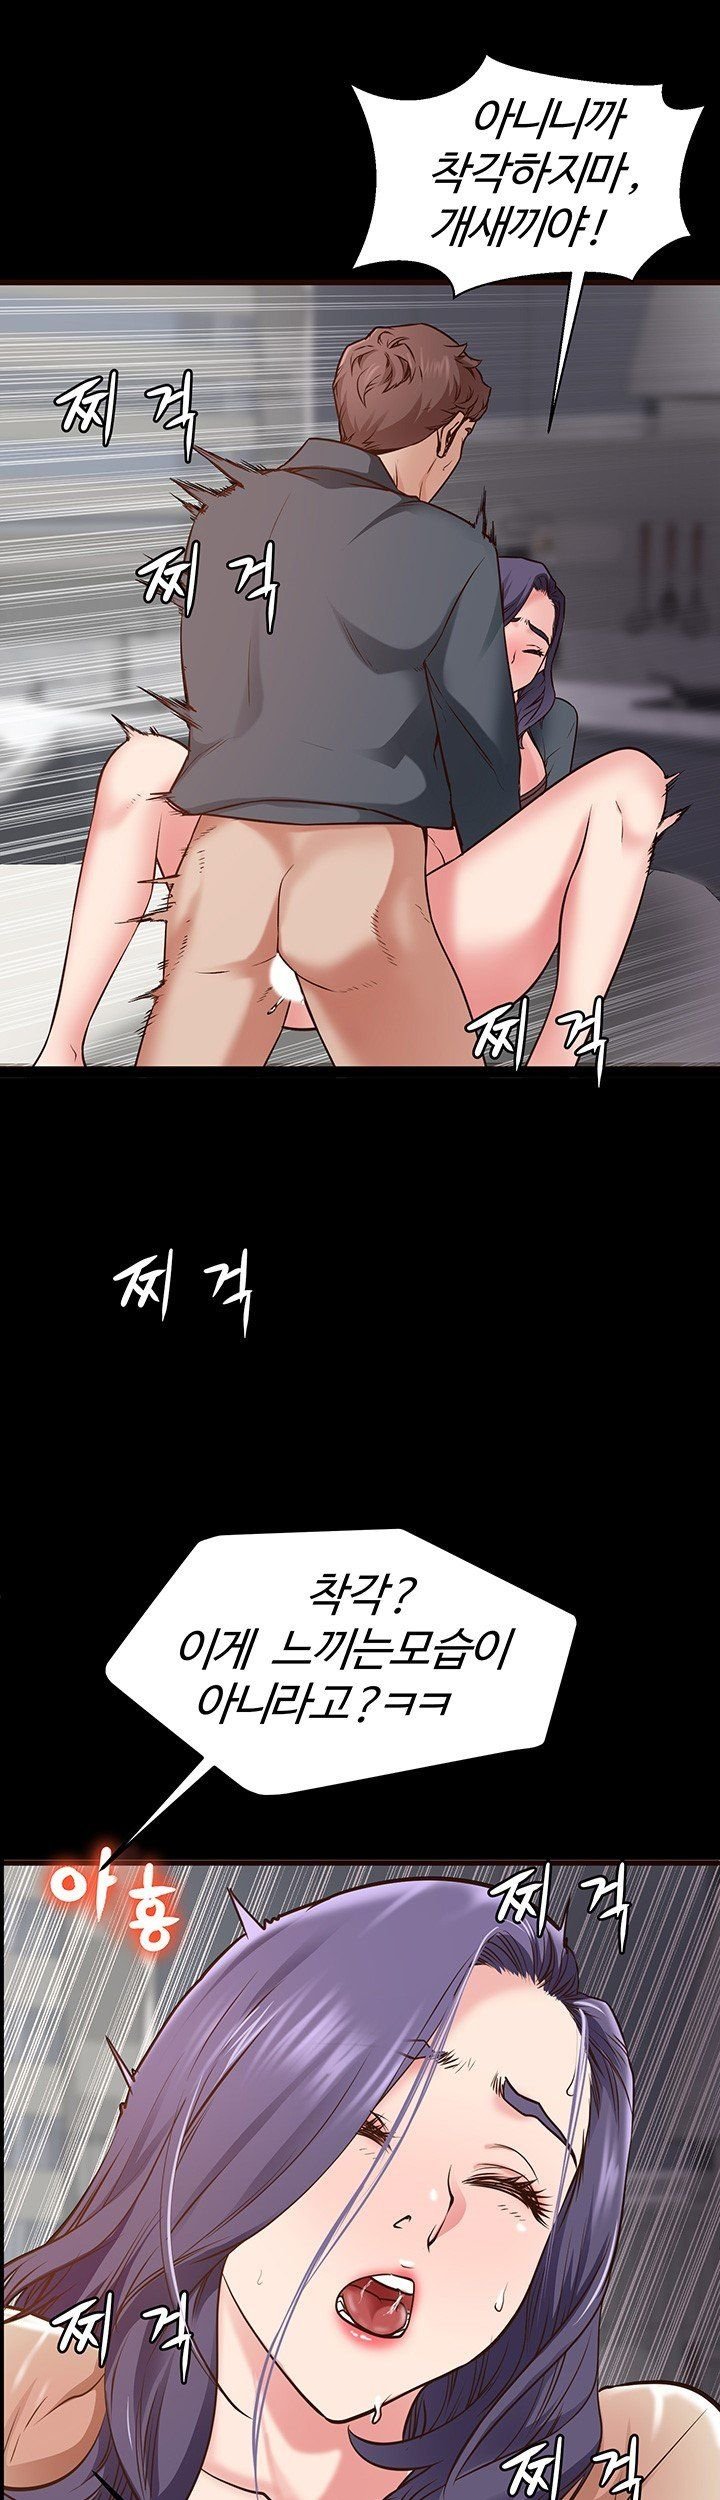 bs-anger-raw-chap-3-20